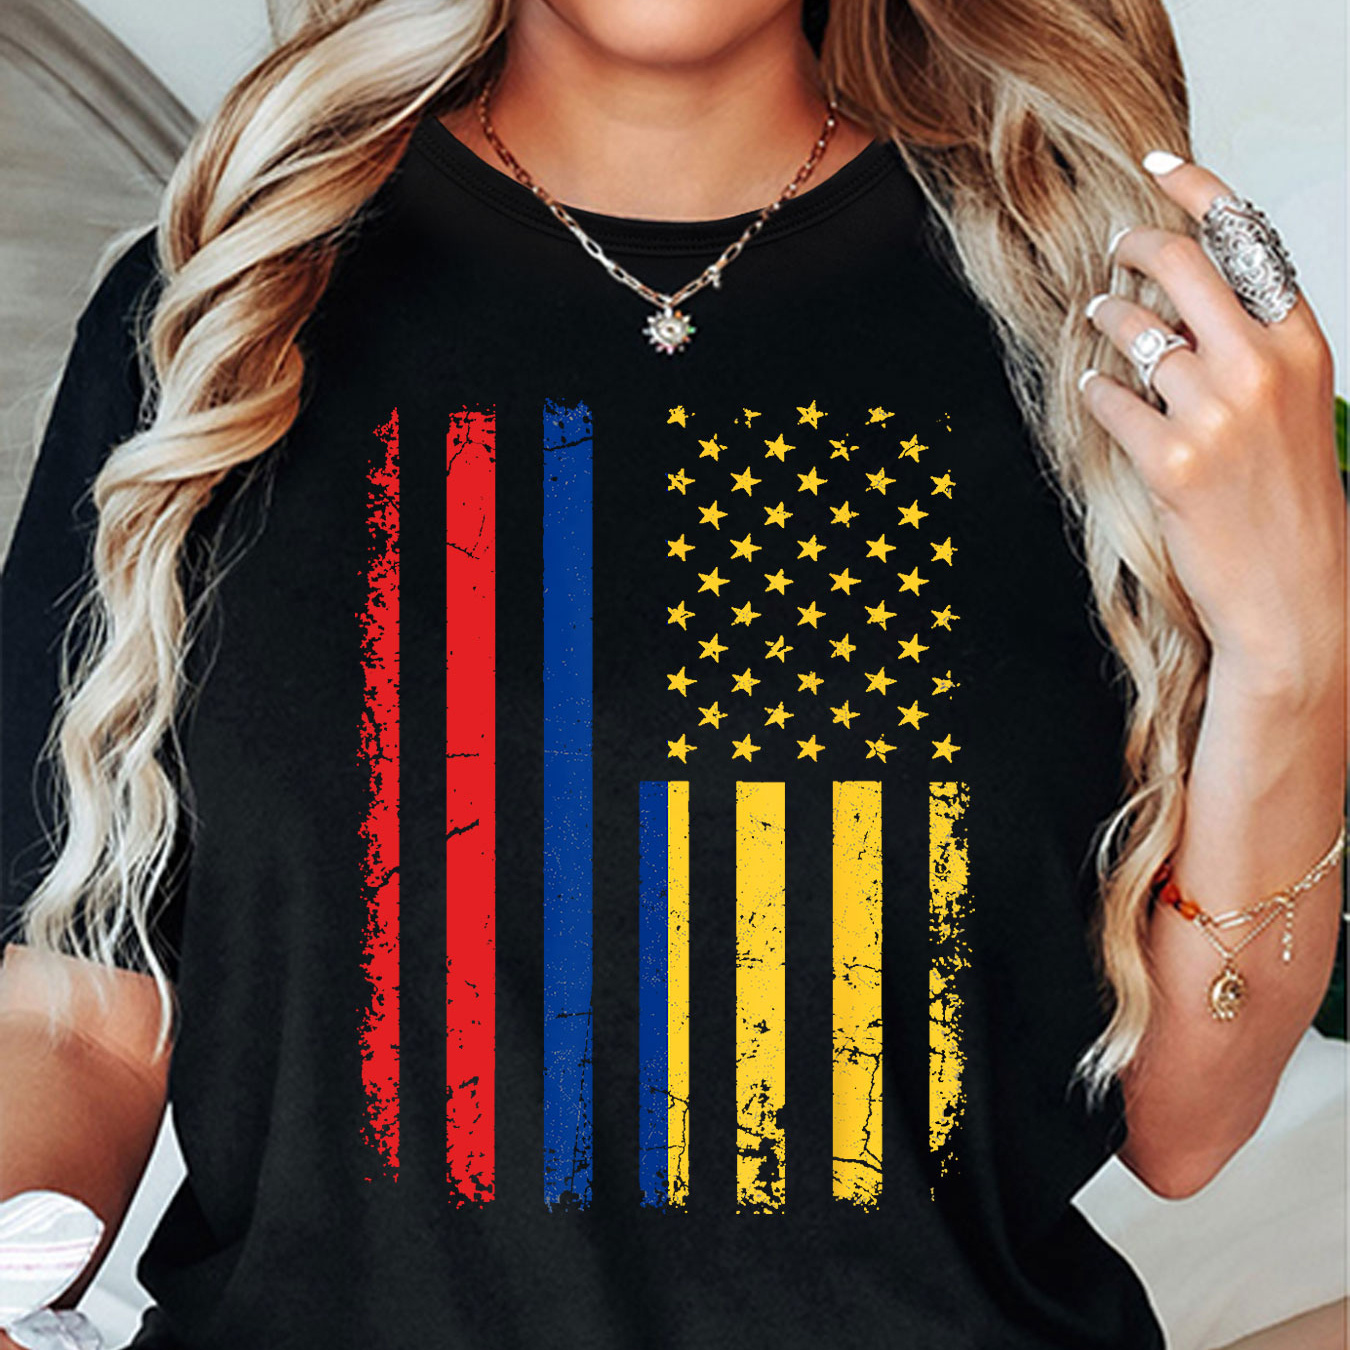 

Women's Casual Short Sleeve T-shirt With Colombia Flag Print, Round Neck, Comfort Fit